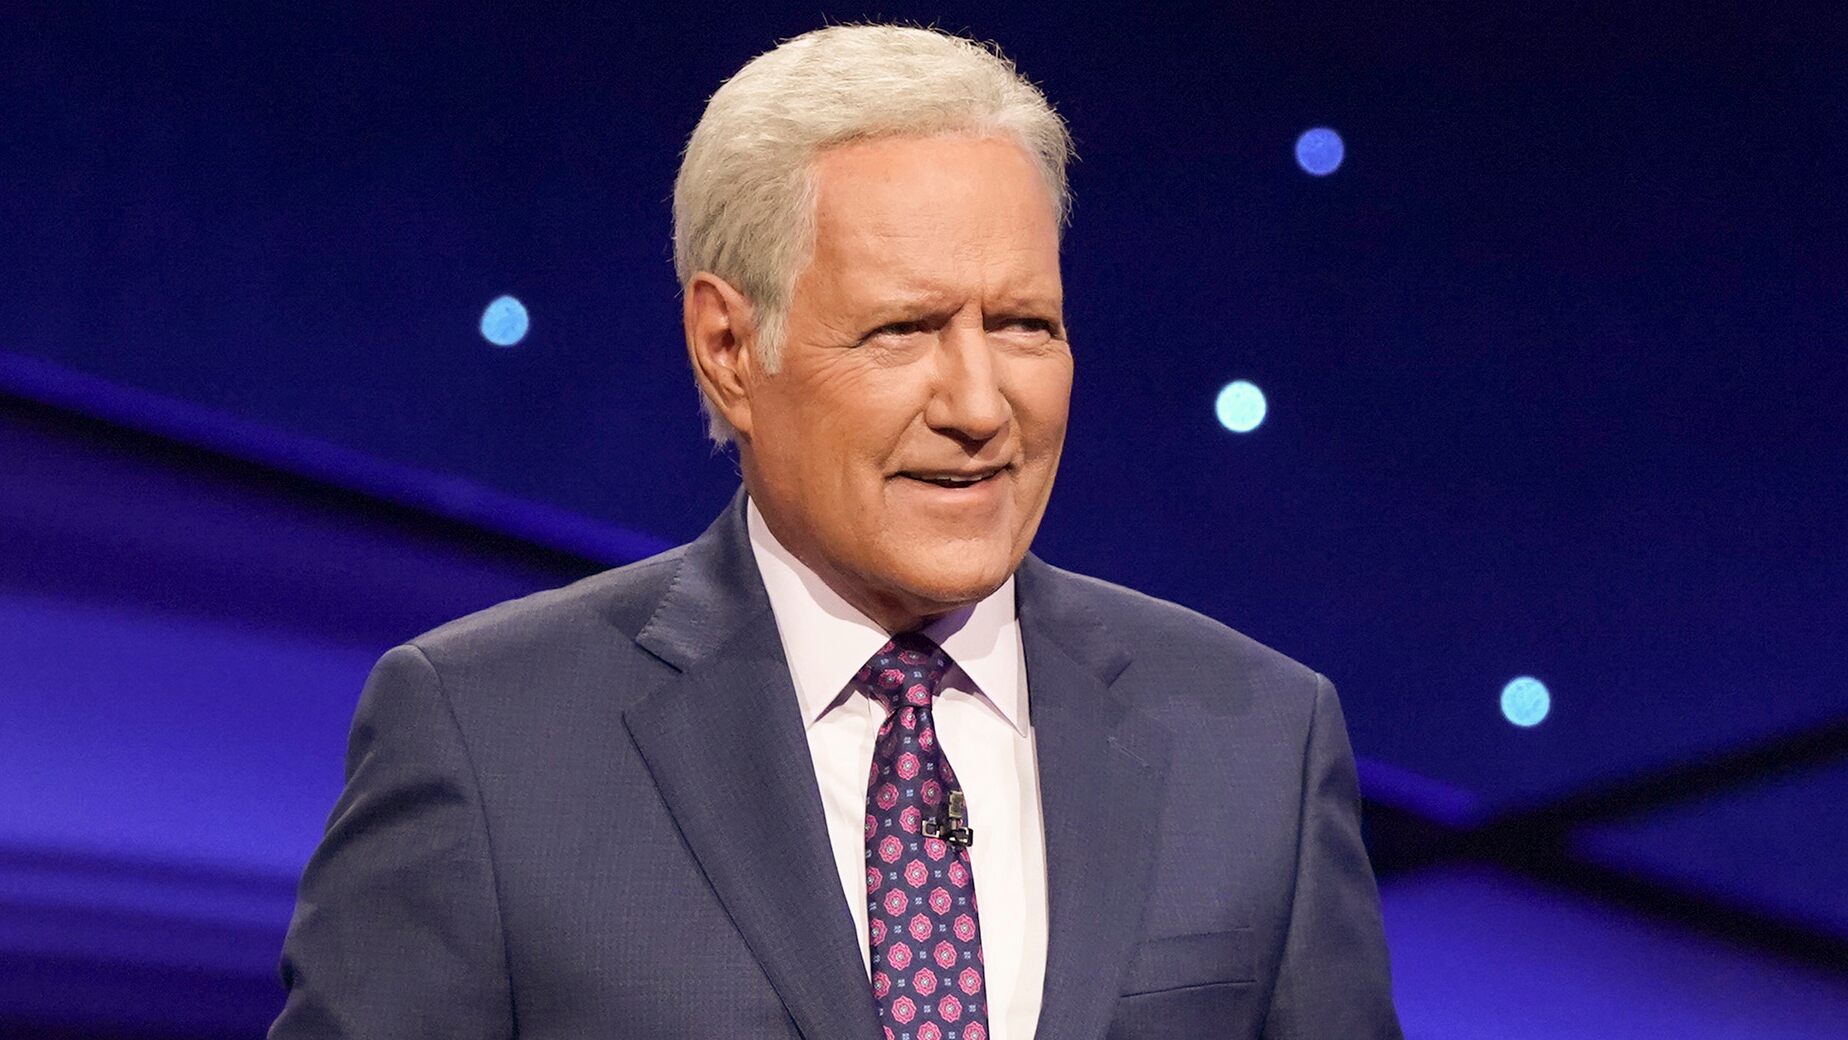 Daughter of Alex Trebek pays tribute to late Jeopardy host after last episode: ‘I was cool’